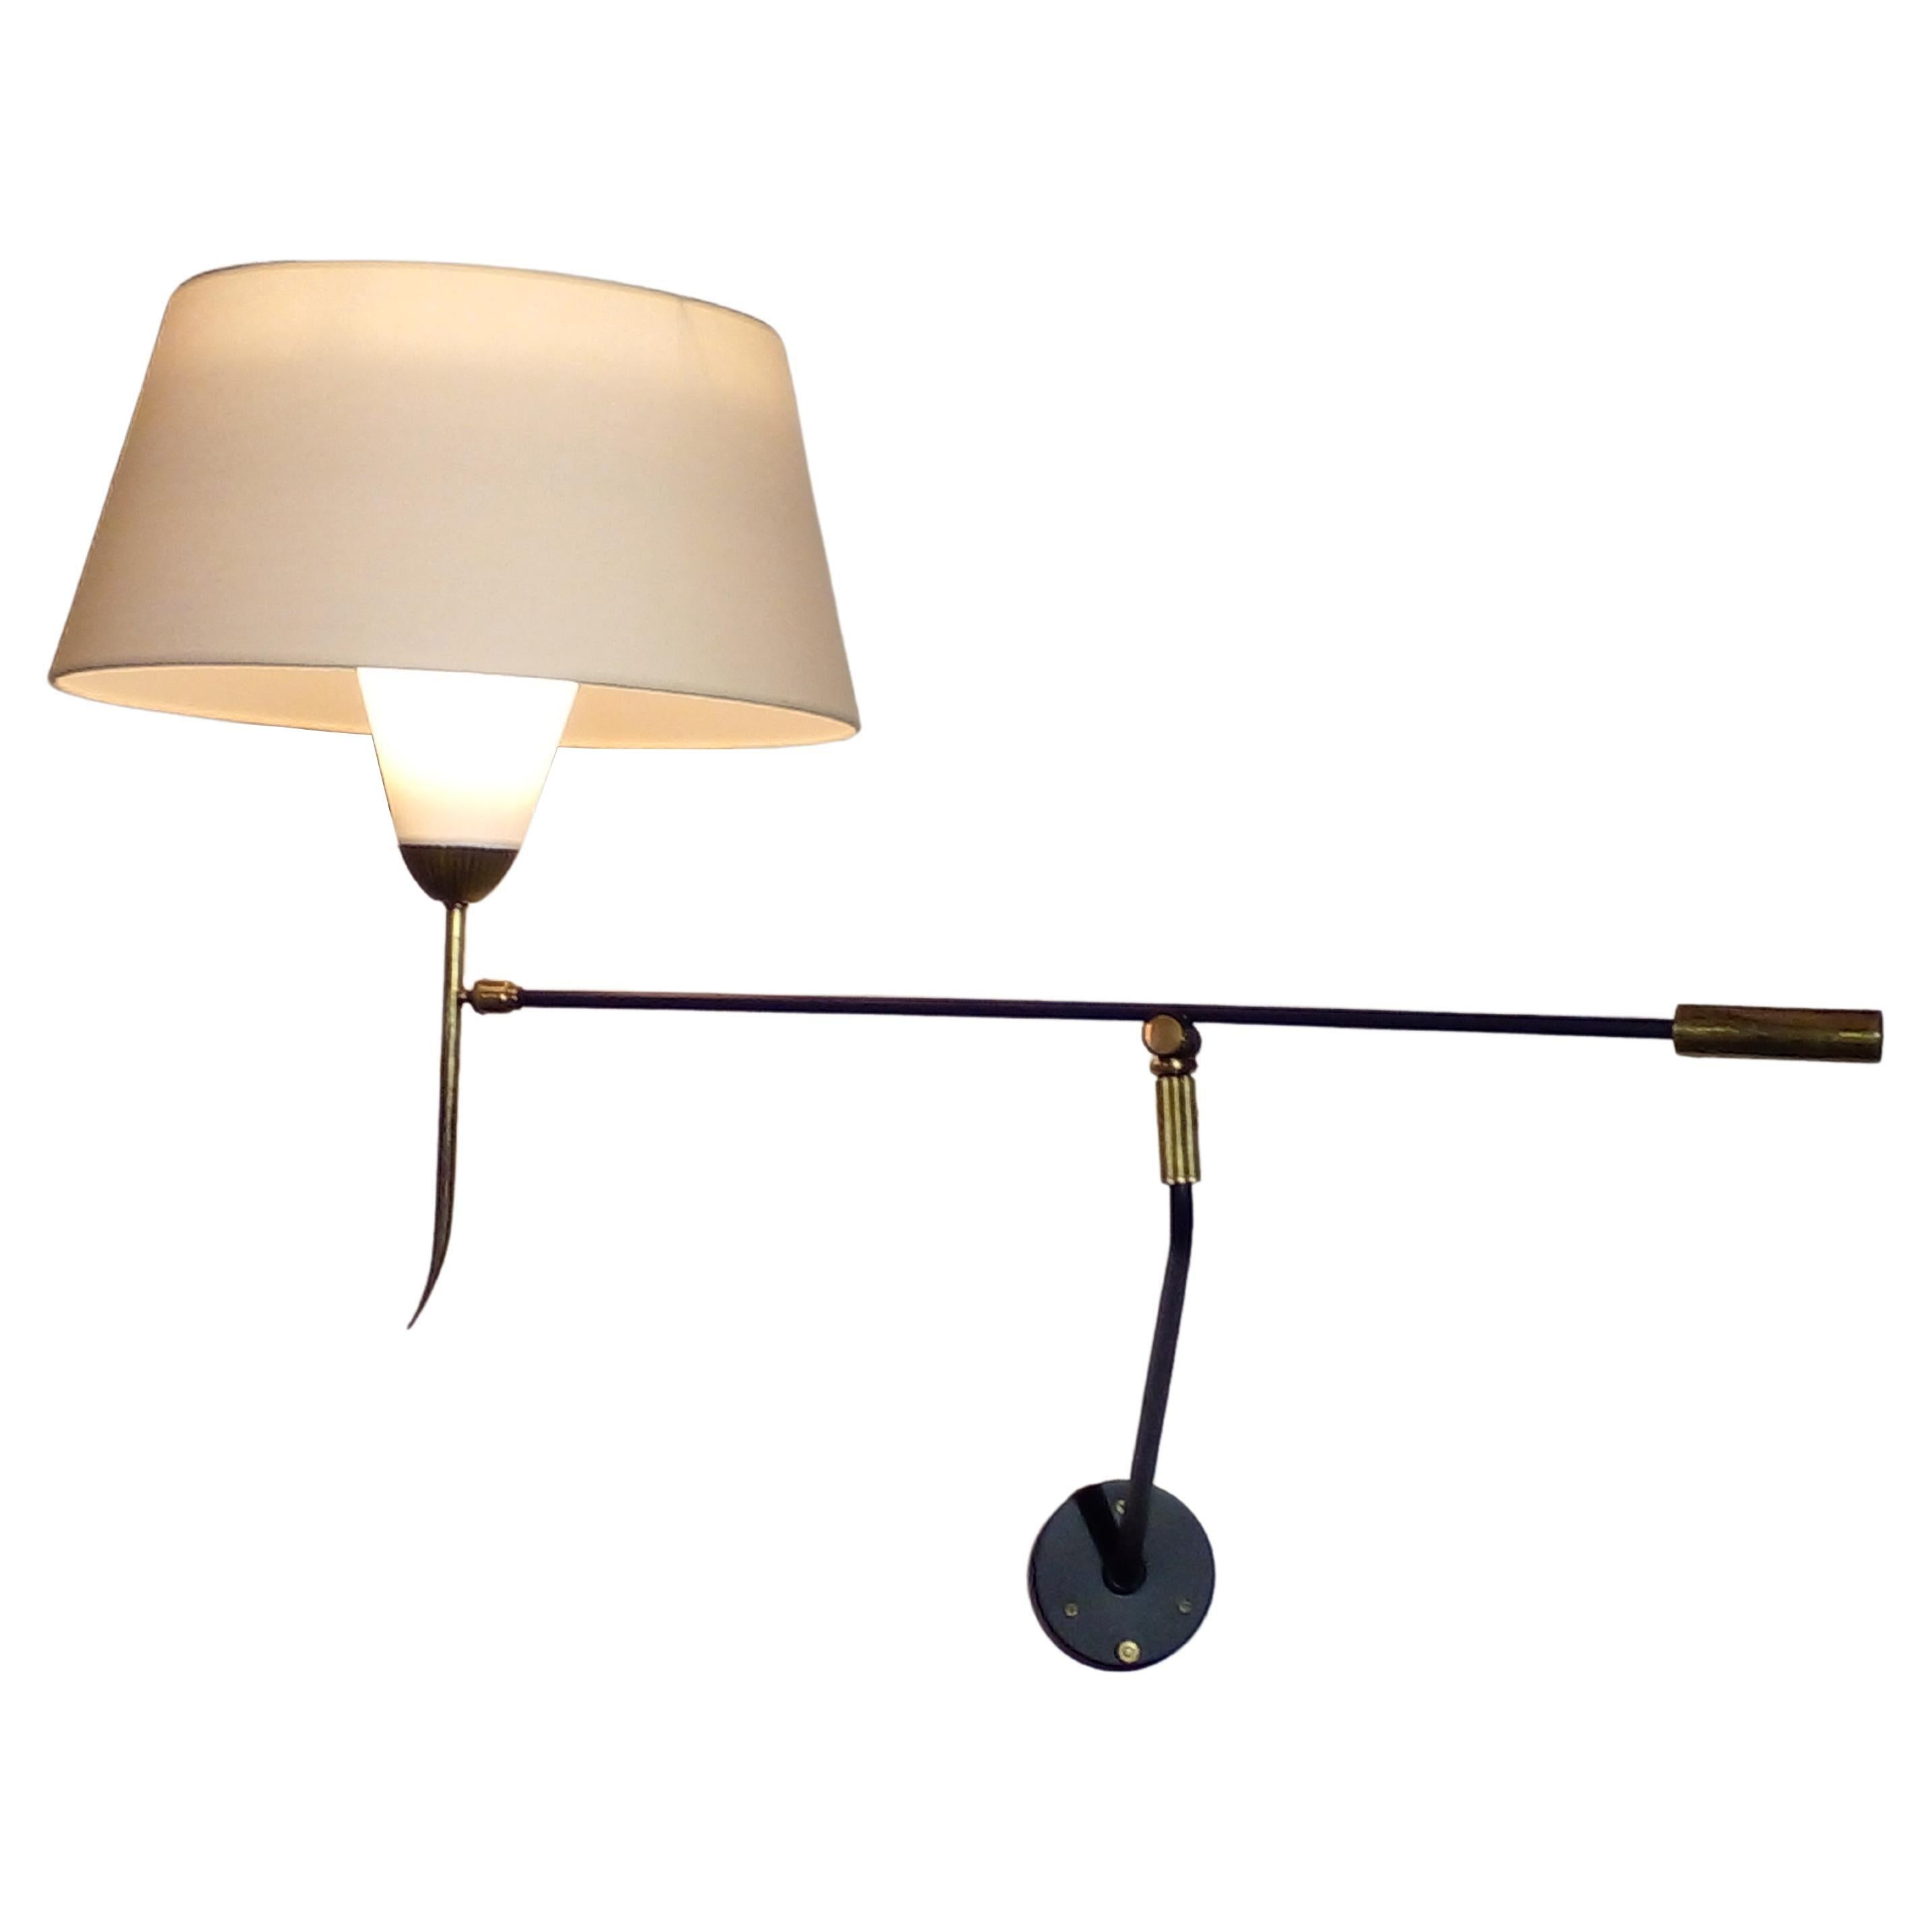 Foldable and adjustable wall light by Maison Lunel, France circa 1950.

This unusual wall lamp is composed of a swinging light arm with a double shade in cotton and celluloid mounted on a ball joint. This arm is itself fixed to an axis fixed to